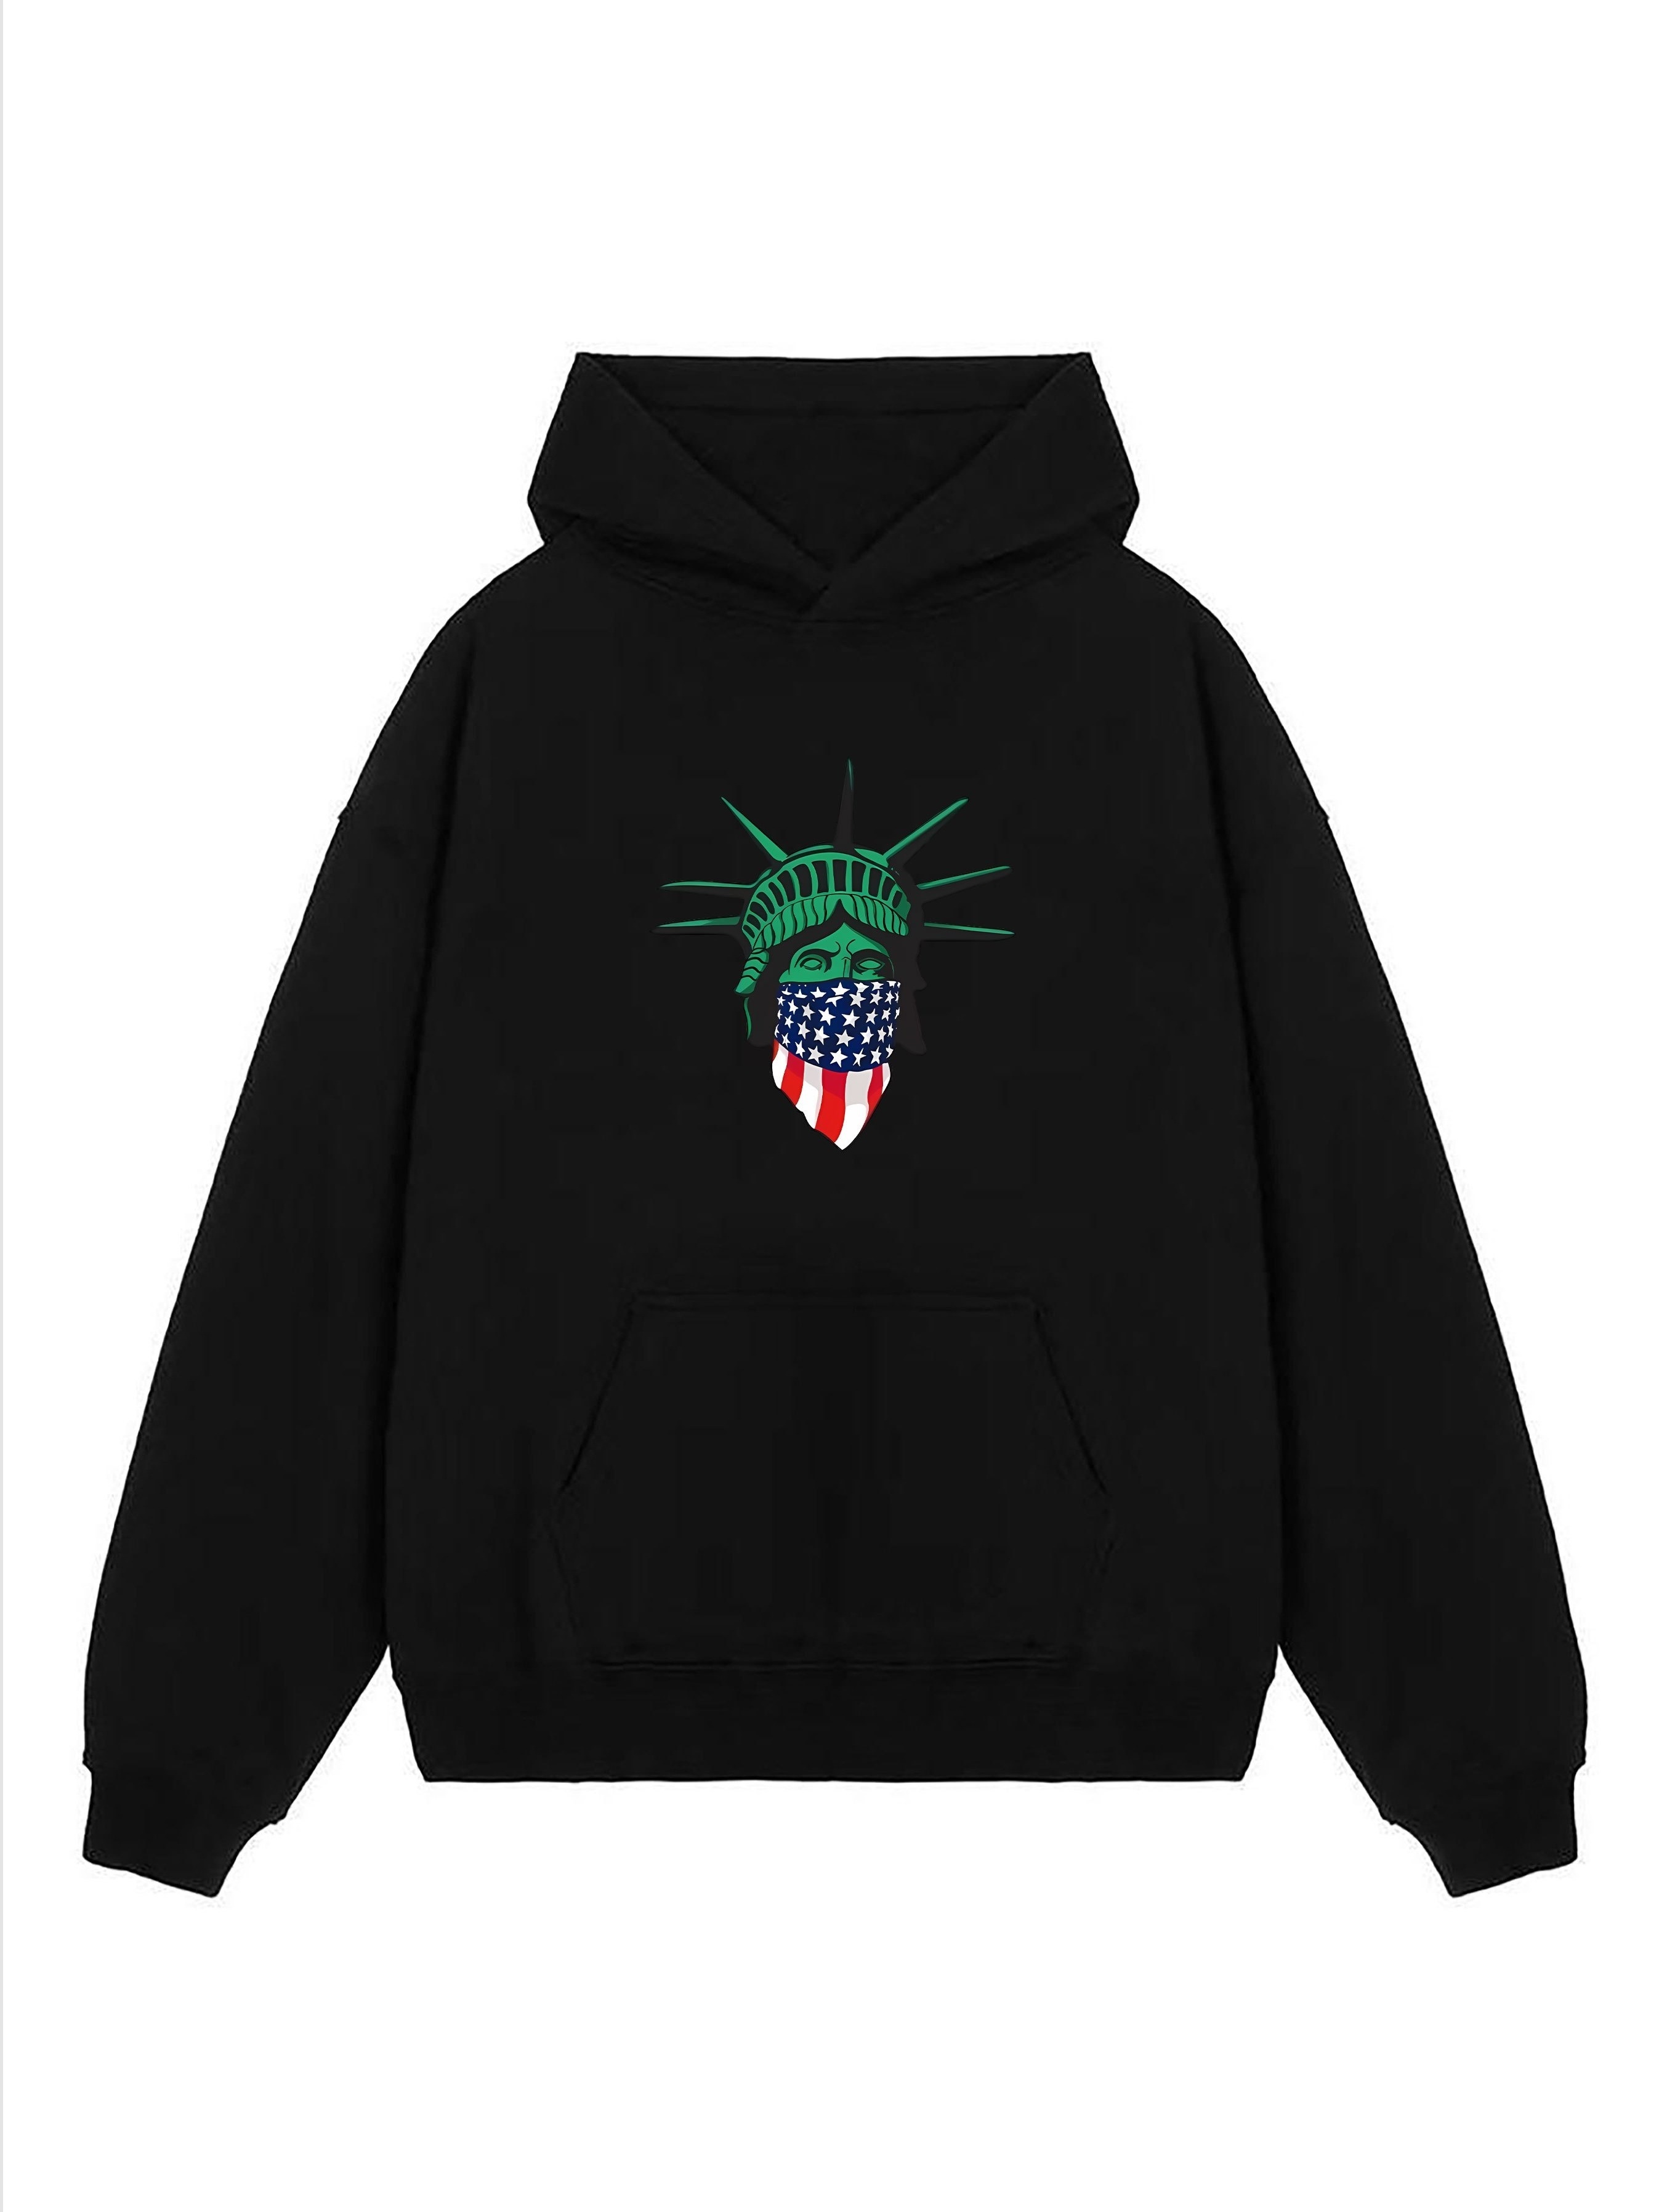 Statue Of Liberty With Mask Print Hoodie, Hoodies For Men, Men's